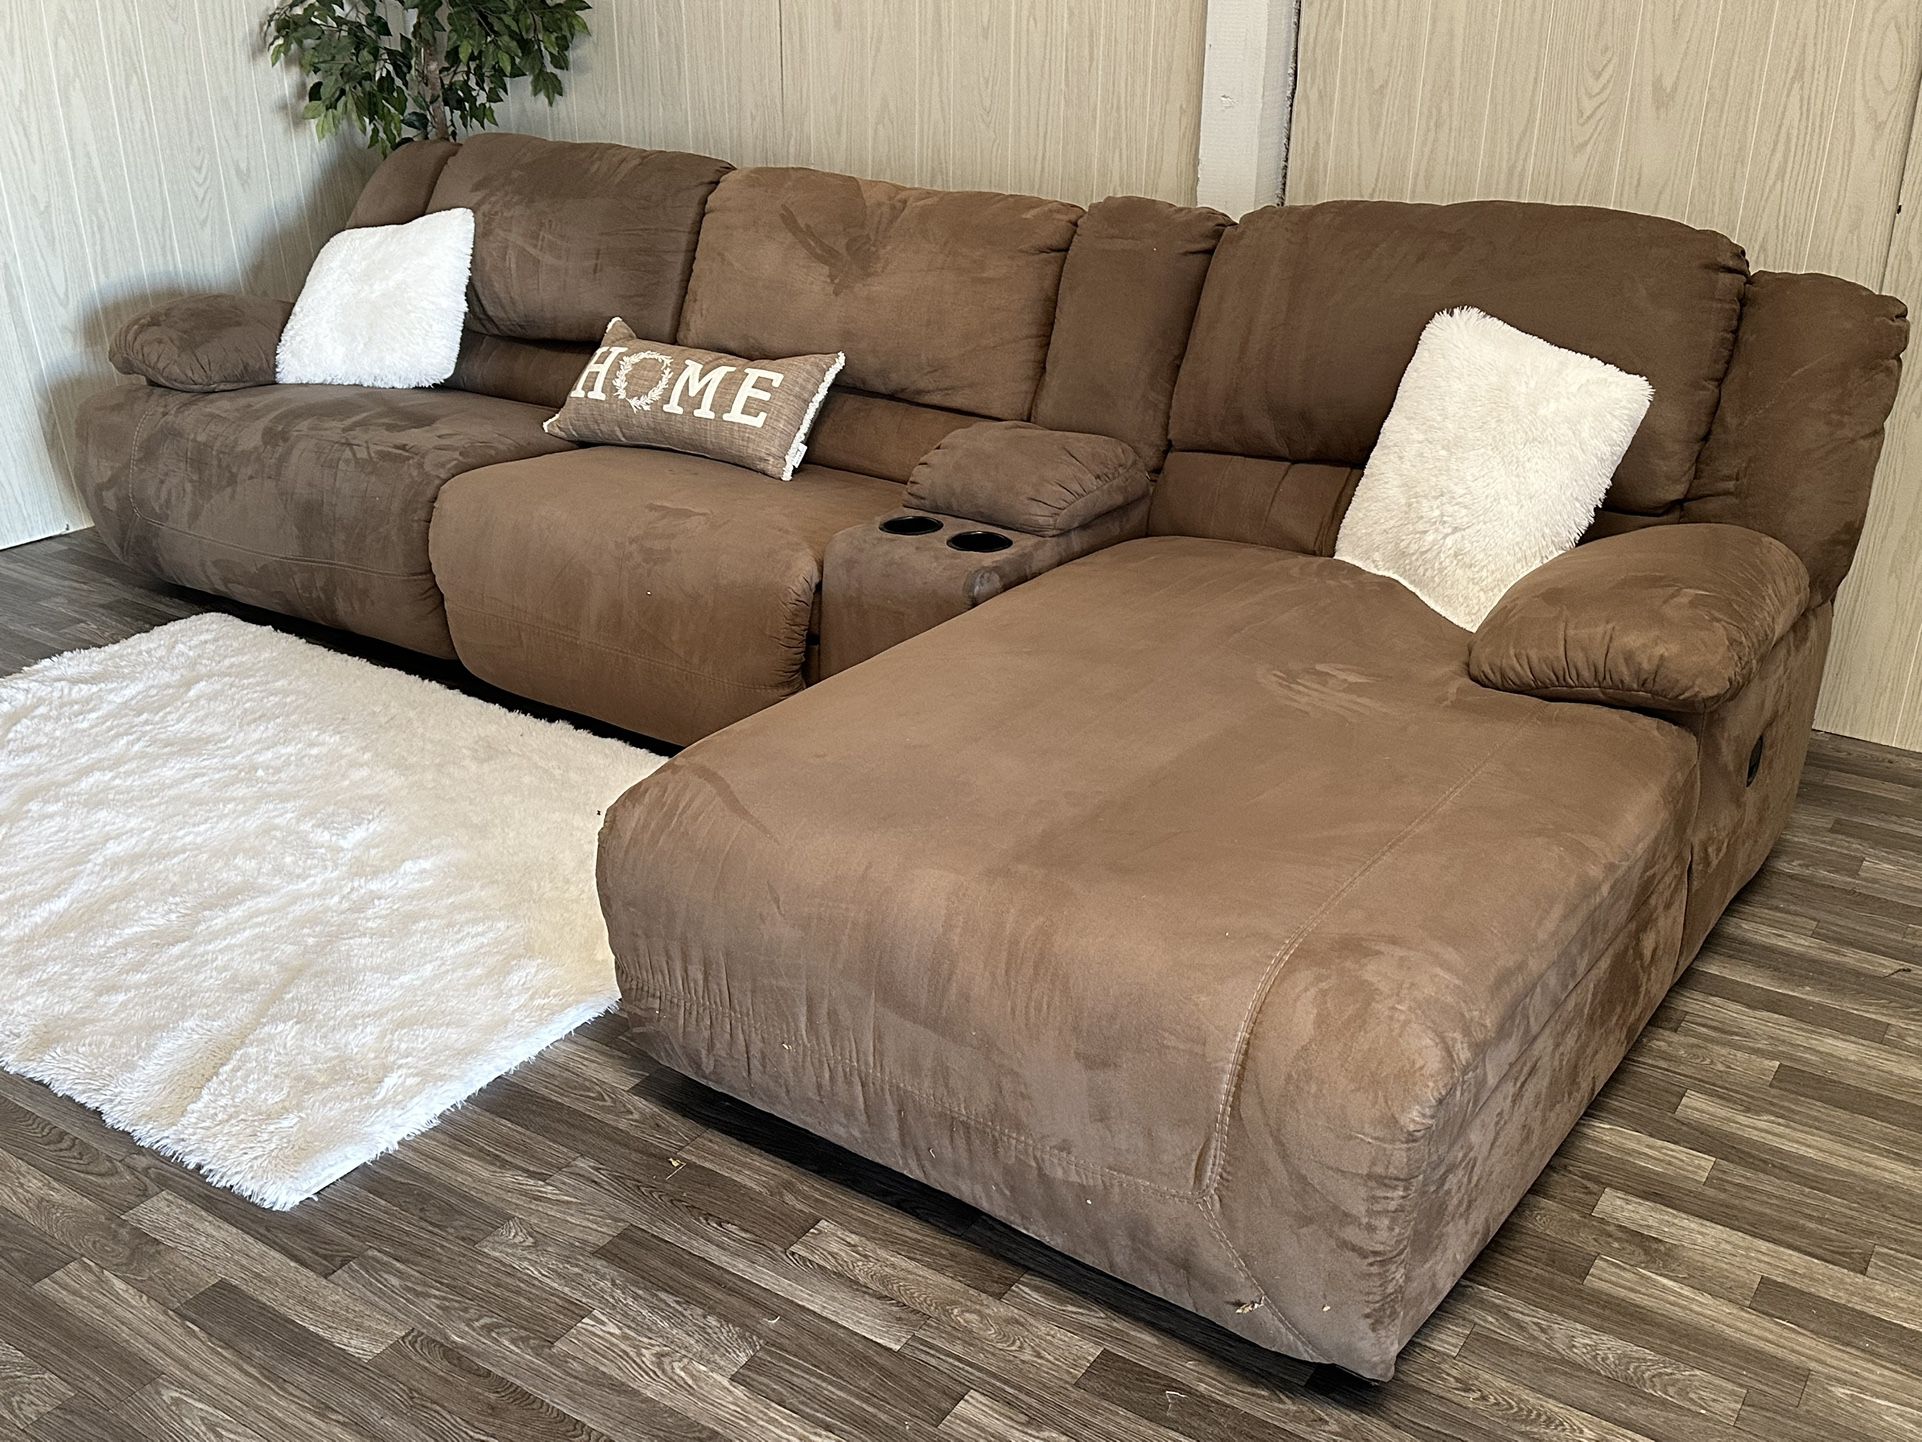 Large Brown Reclining Ashley Furniture Sectional Couch - Delivery Available 